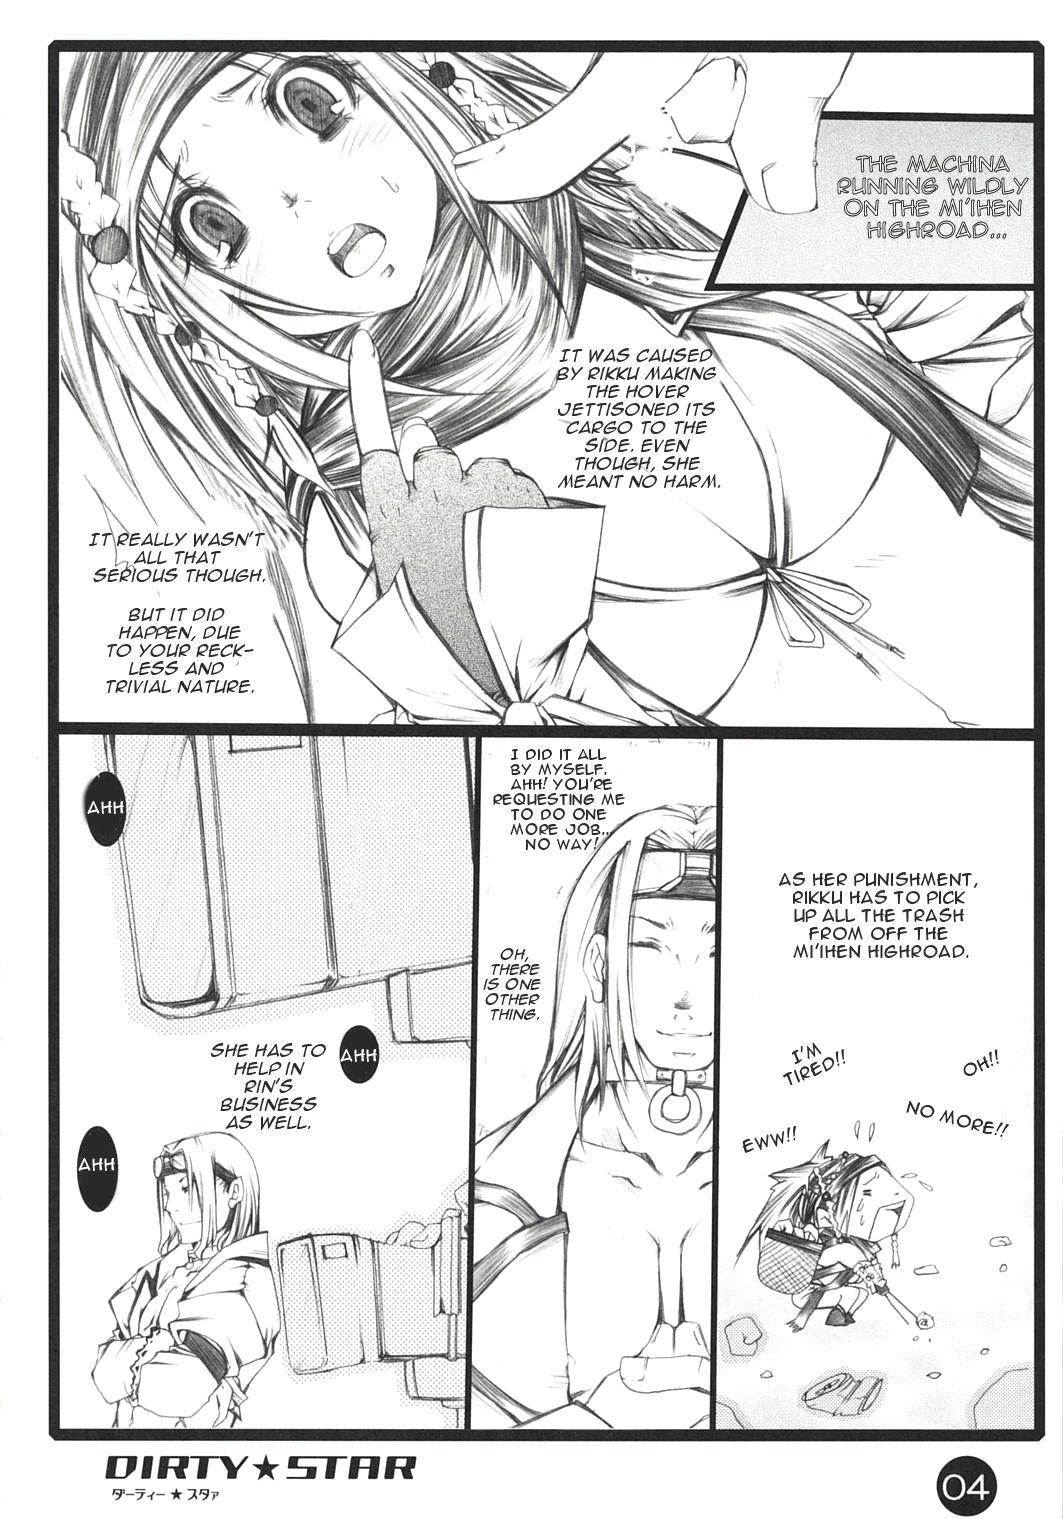 Head Dirty Star - Final fantasy x-2 Insertion - Page 3